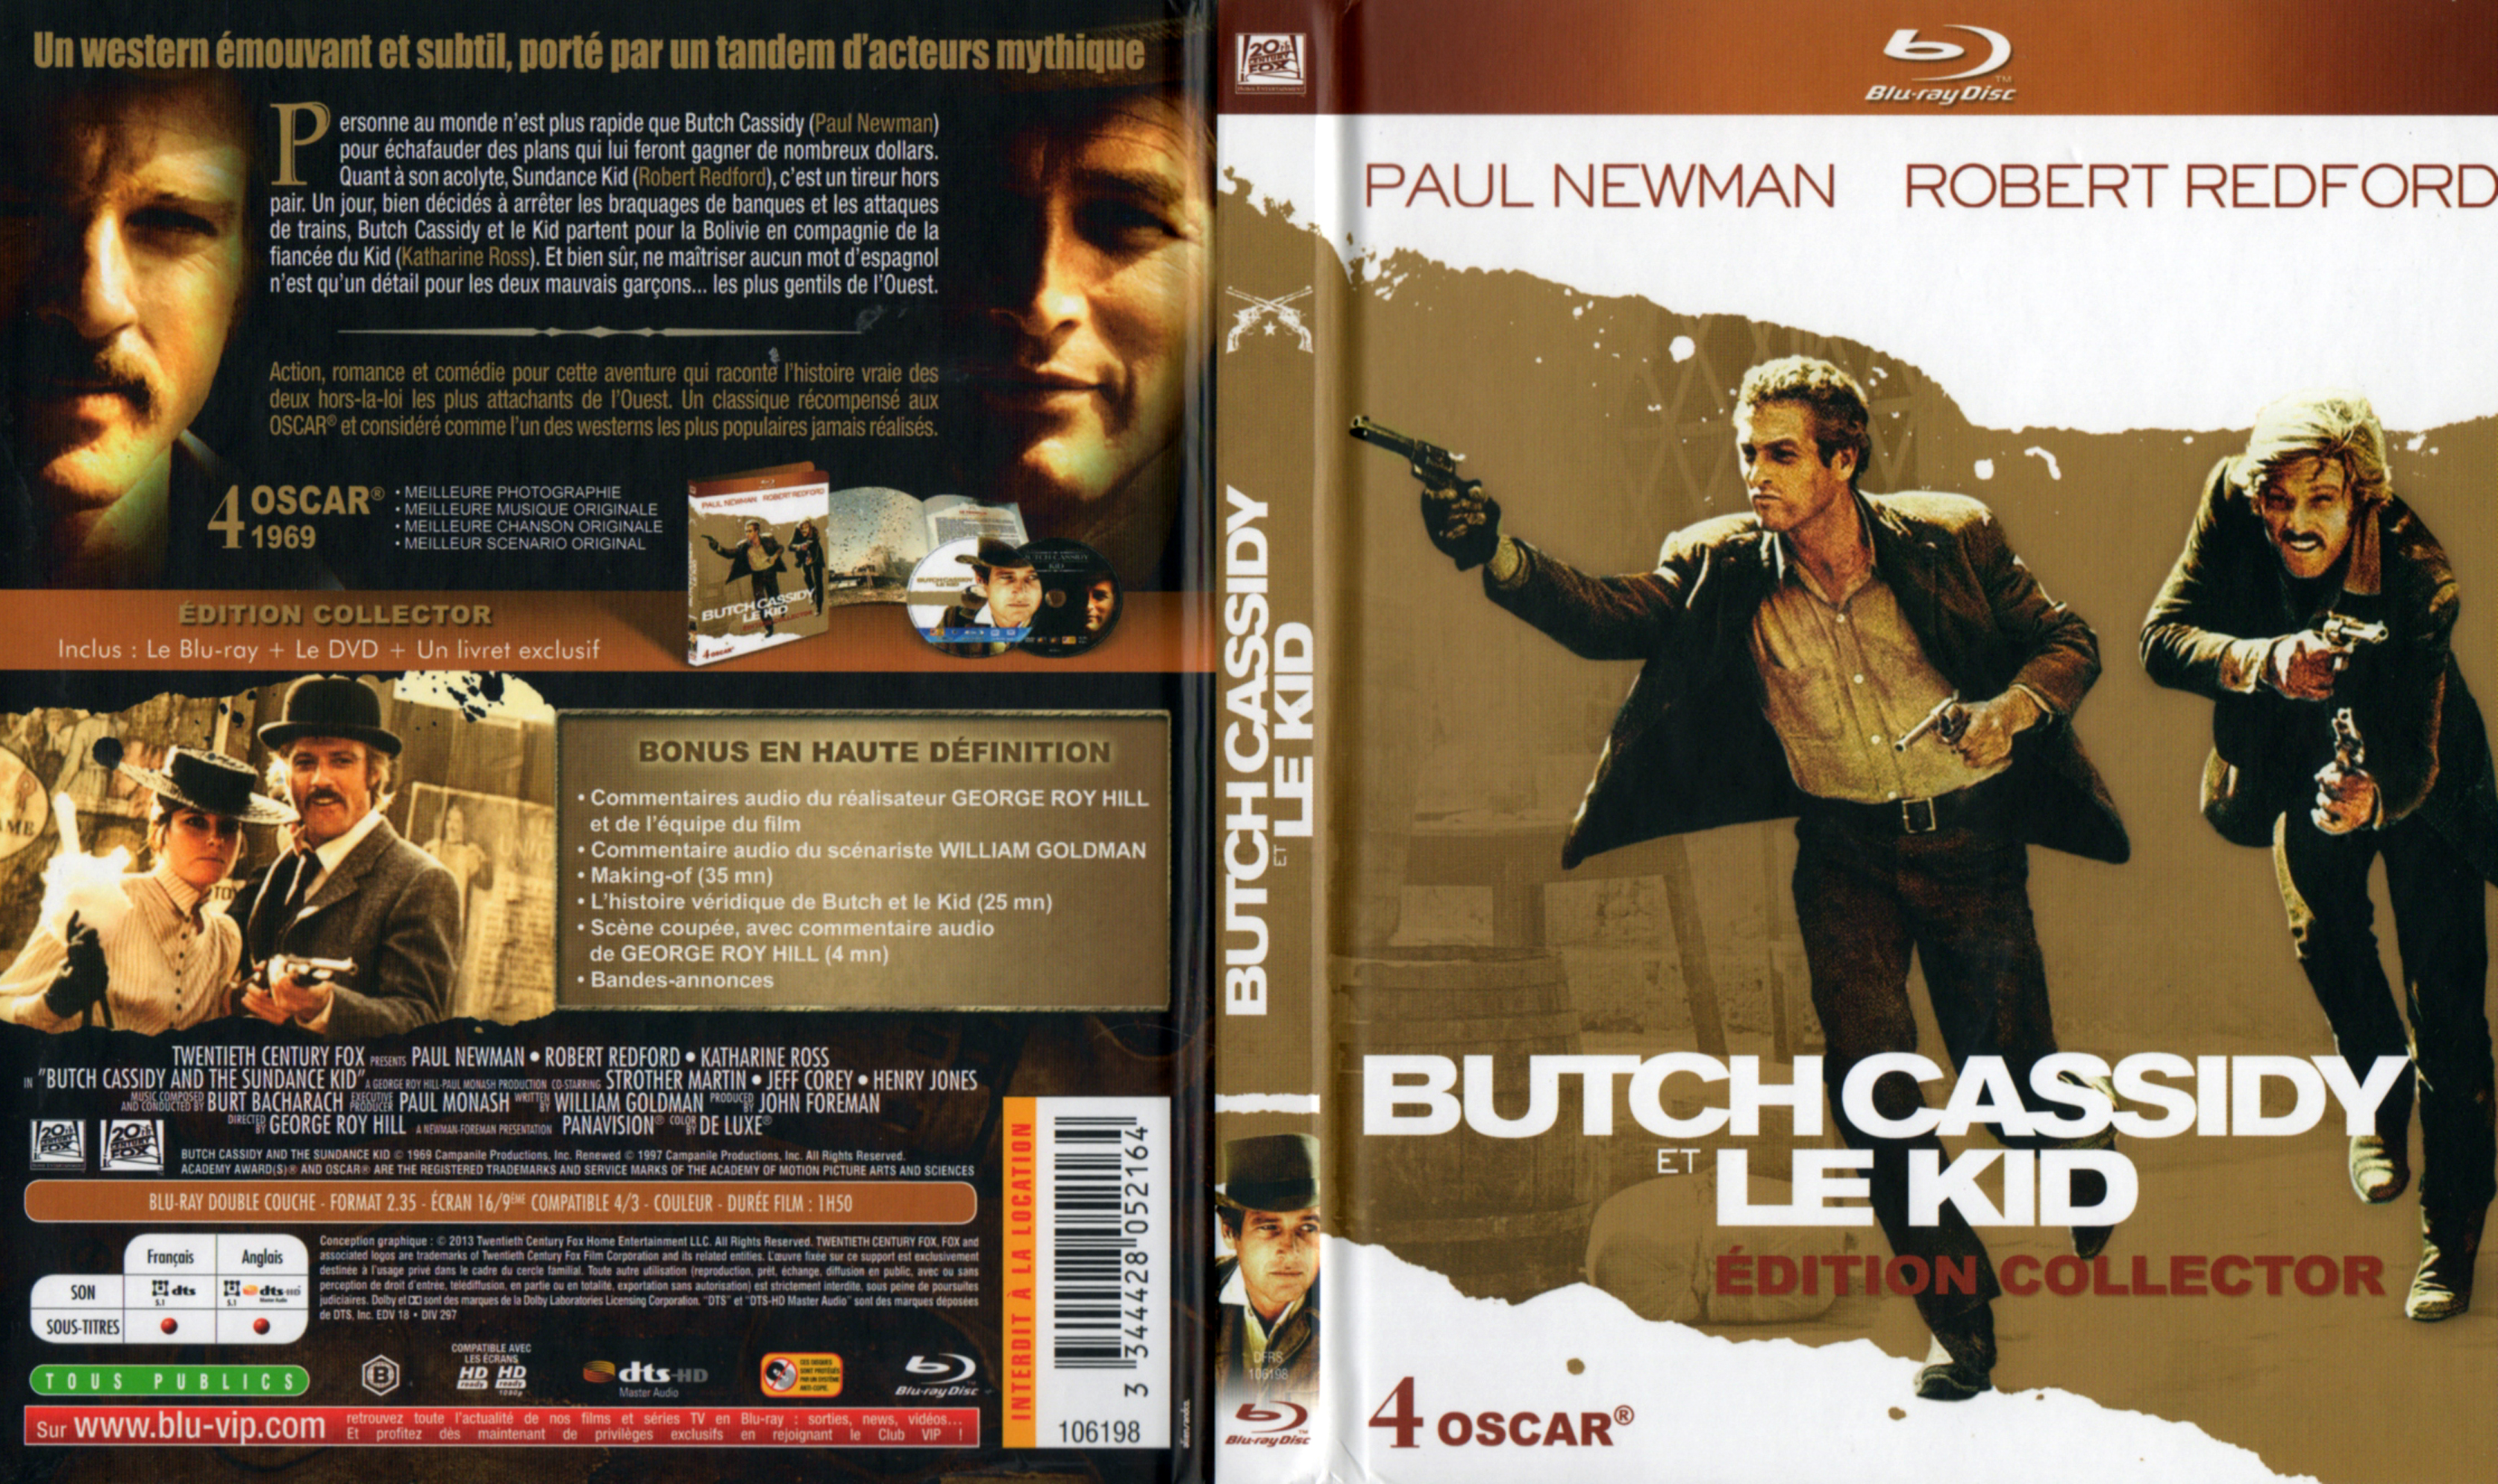 Jaquette DVD Butch Cassidy et le Kid (BLU-RAY)